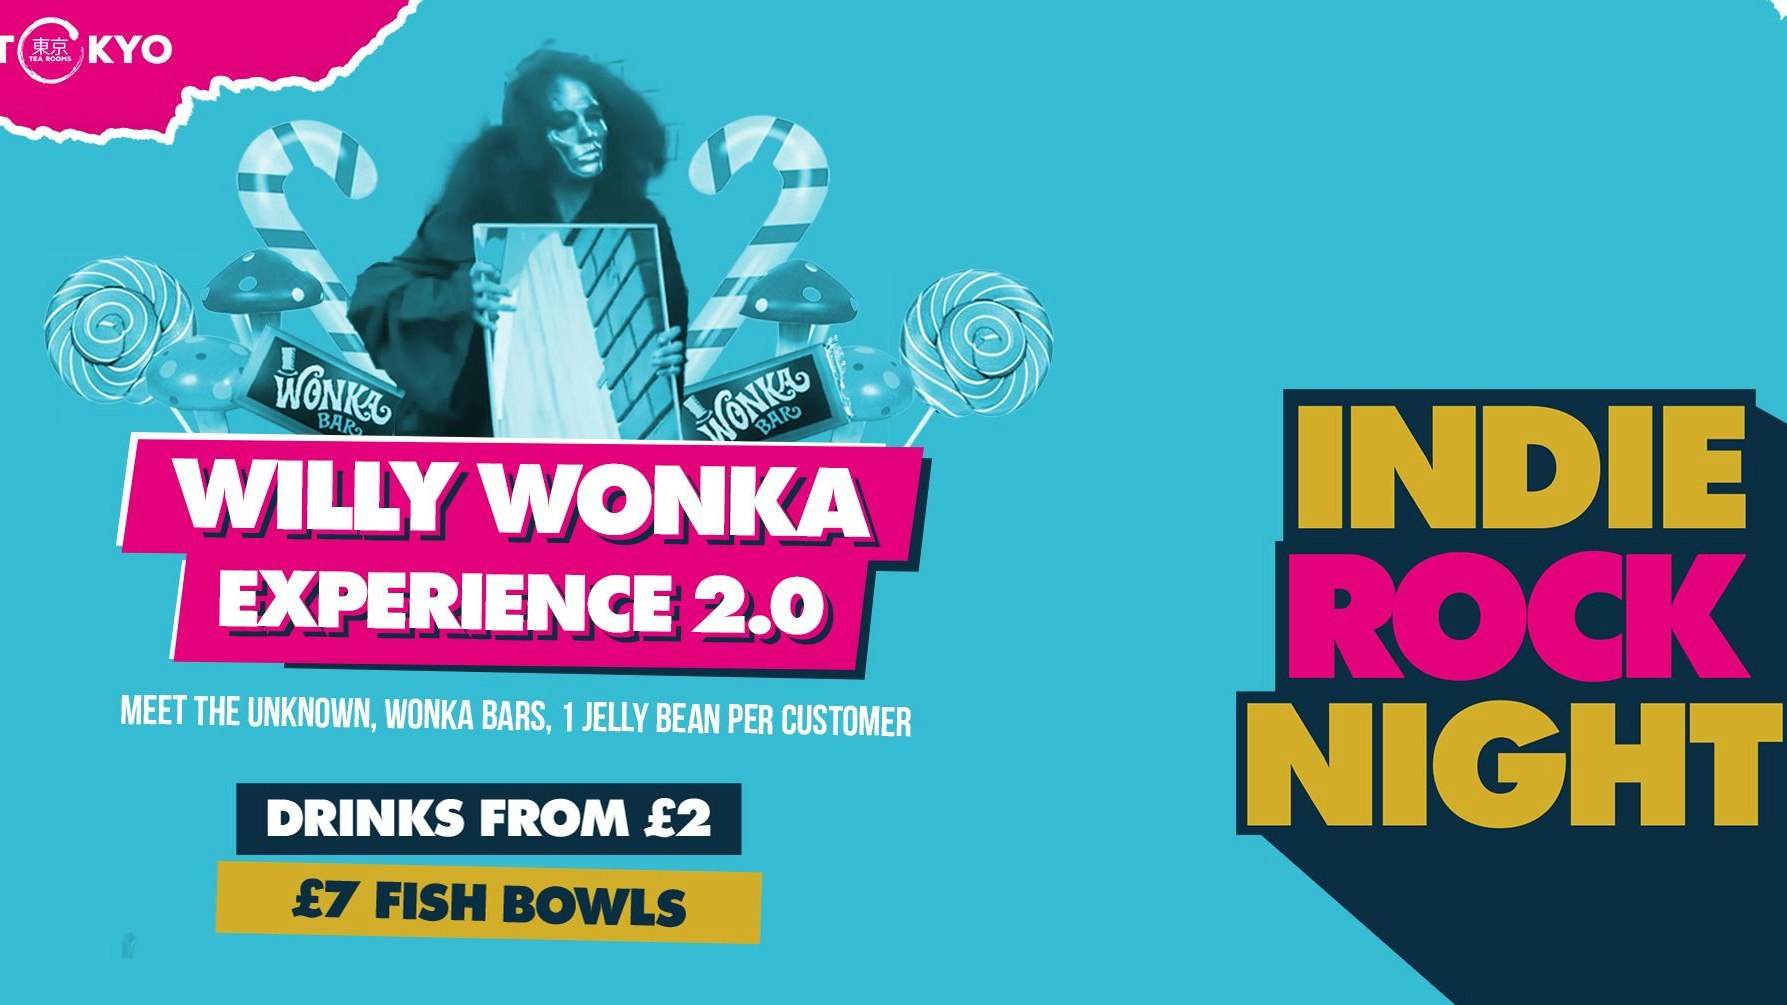 Indie Rock Night ∙ WONKA EXPERIENCE 2.0 (EASTER THURSDAY SPECIAL) *LAST 10 ONLINE TICKETS*